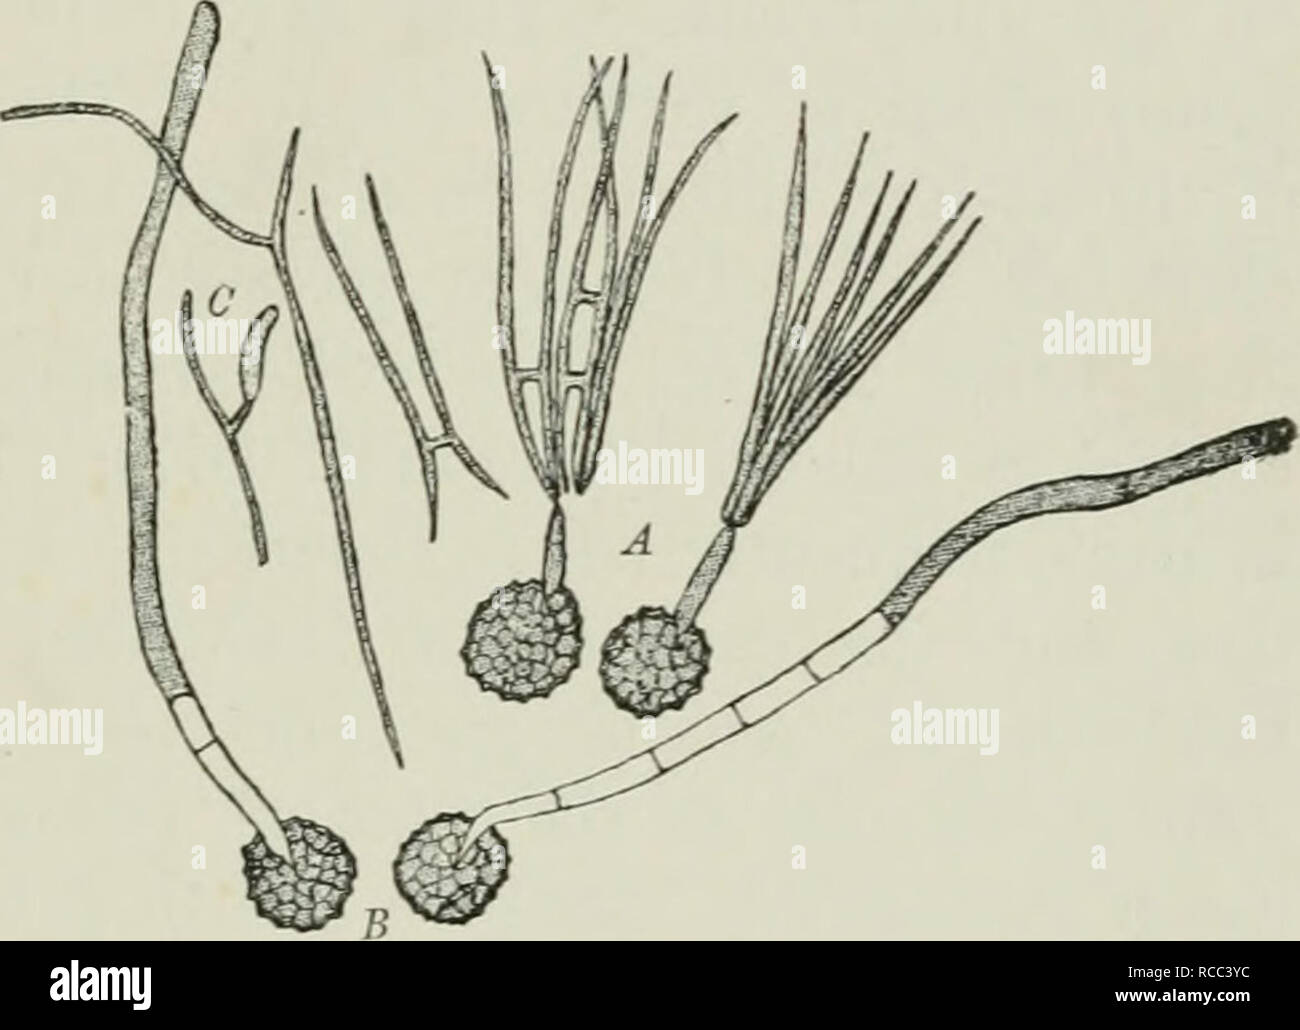 . Diseases of plants induced by cryptogamic parasites; introduction to the study of pathogenic Fungi, slime-Fungi, bacteria, &amp; Algae. Plant diseases; Parasitic plants; Fungi. Fig. 167. — Titletia tritici. A, Two spores germinated in moist air; a short promycelium is developed, and bears a crowu of conidia (sporidia), several of which have fused in pairs. Fushion of conidin, germination, and development of a secondary conidium, C, are also shown. B, Two spores germinated in water with promycelia which elongate till the water surface is reached, where they form sporidia; the . promycelia are Stock Photo